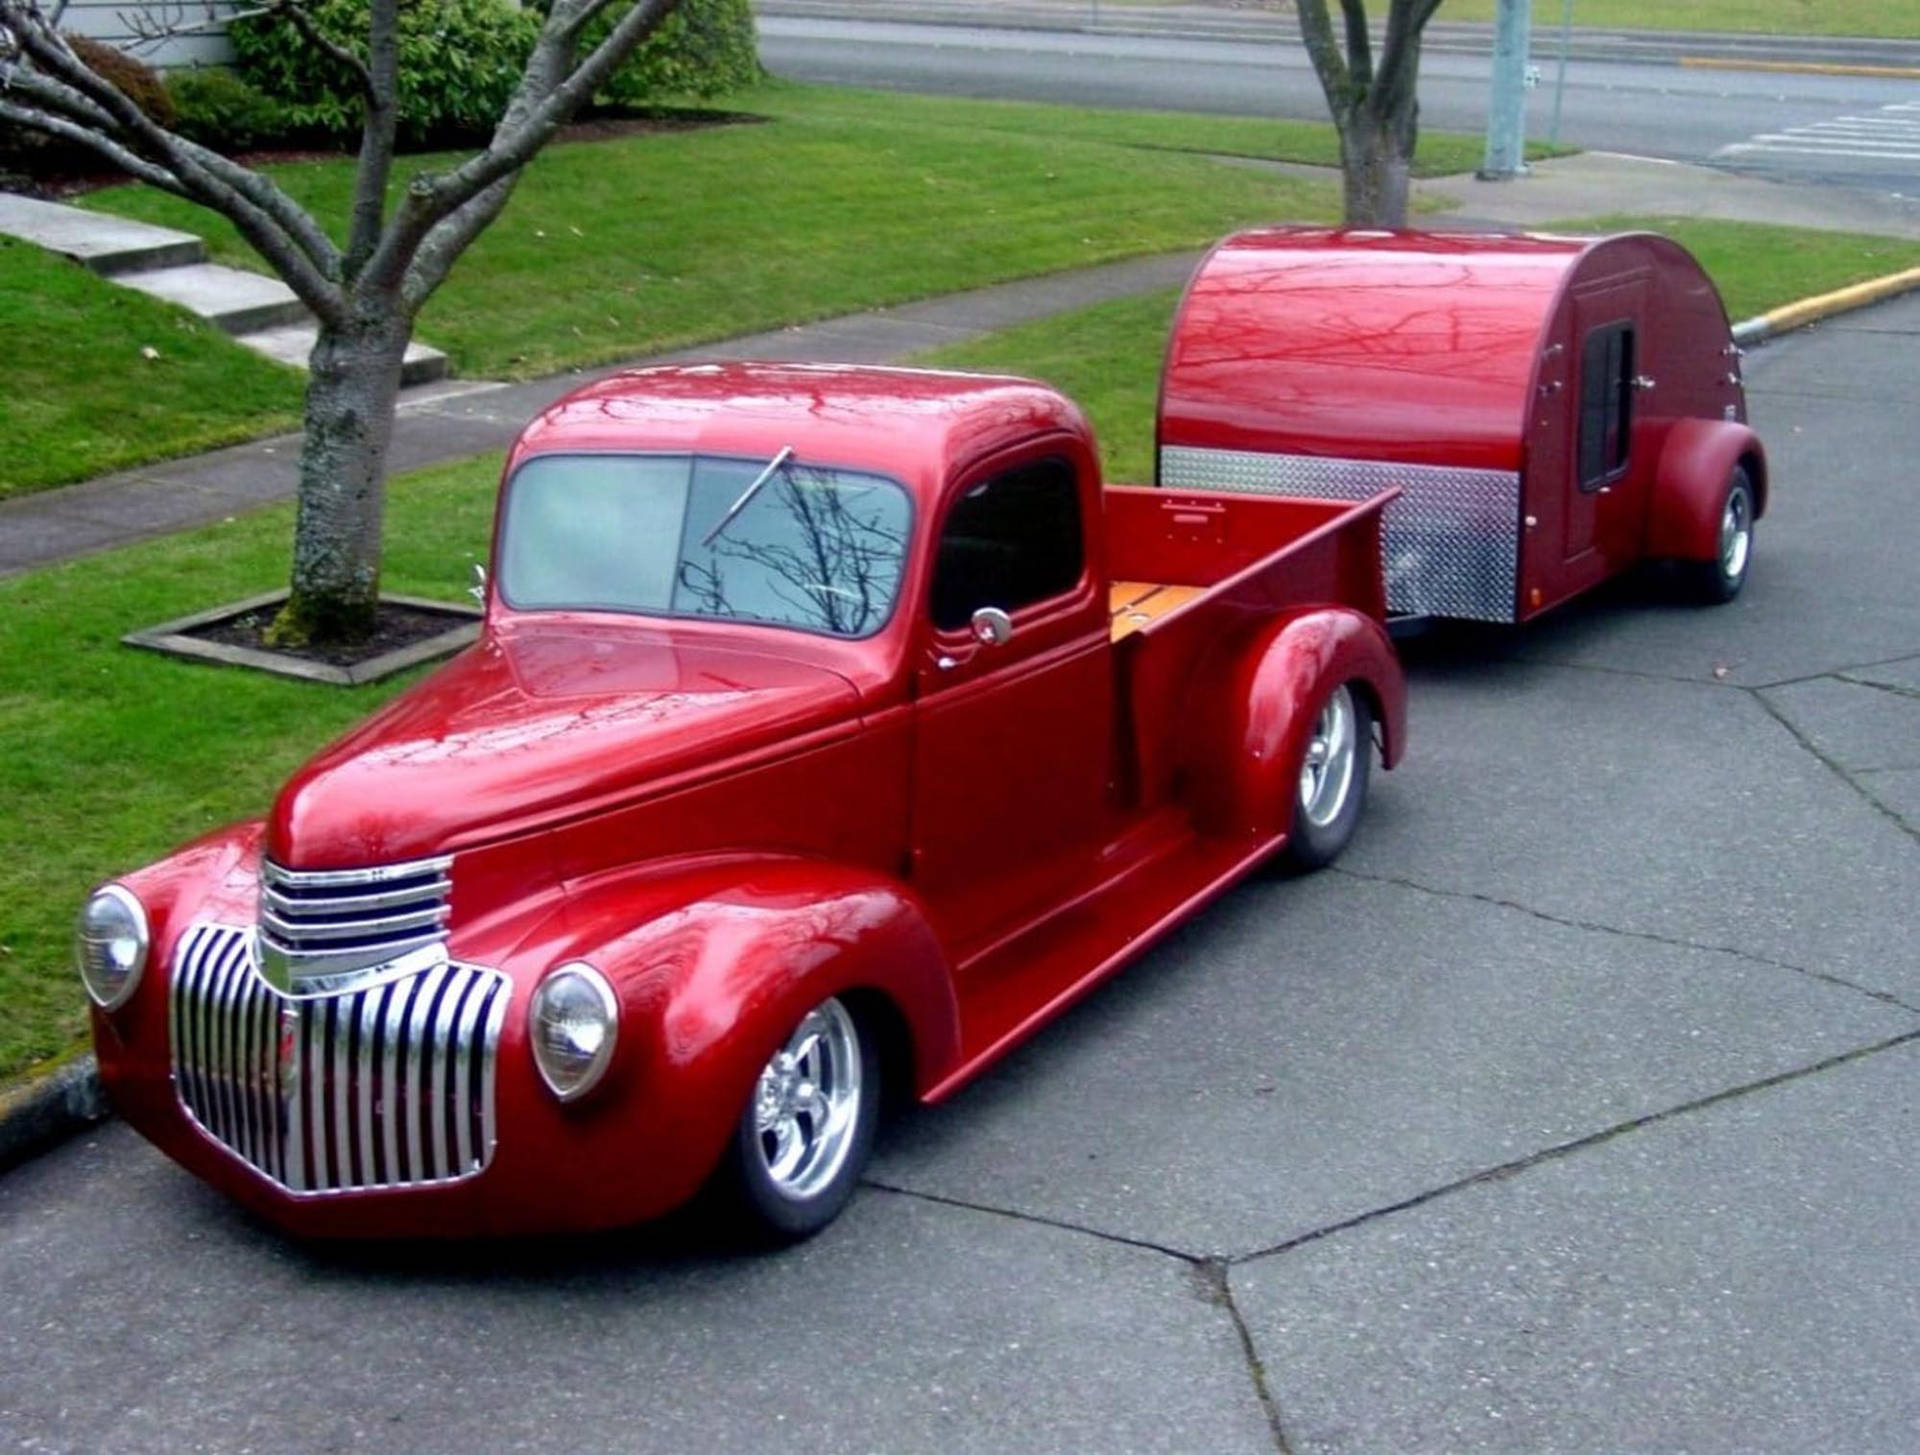 Metallic Red Old Ford Truck